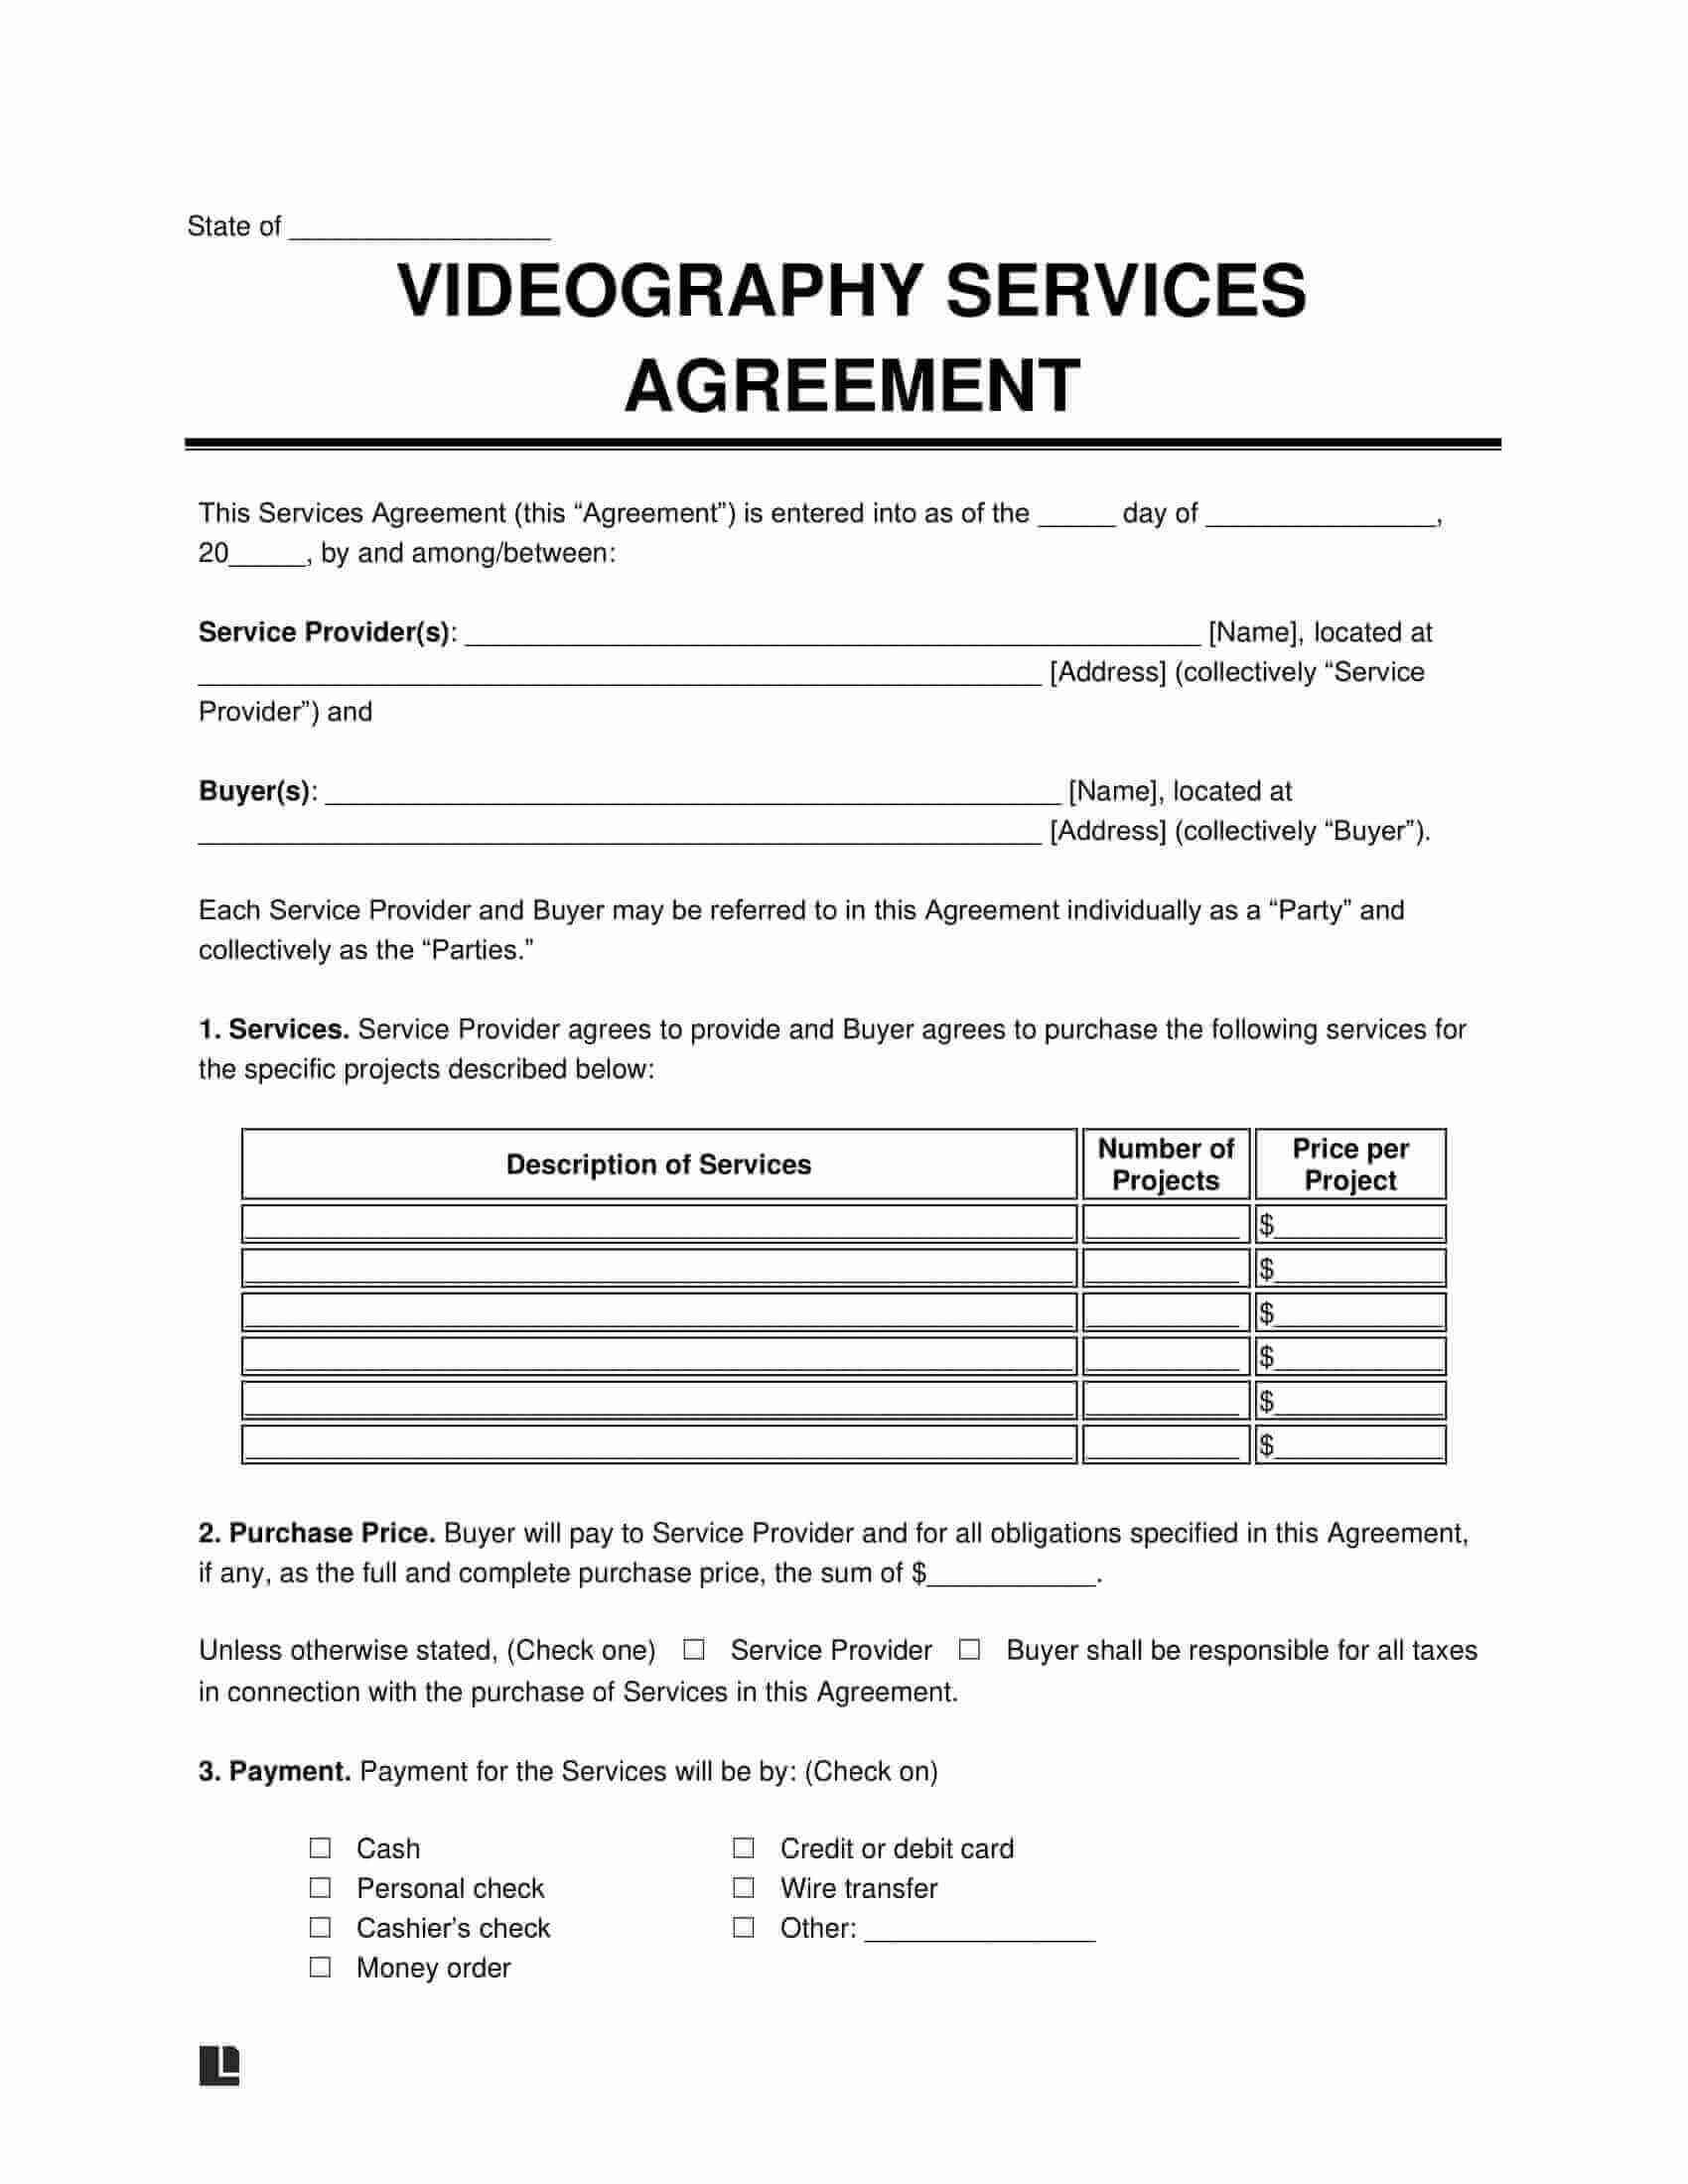 Videography Services Contract Template